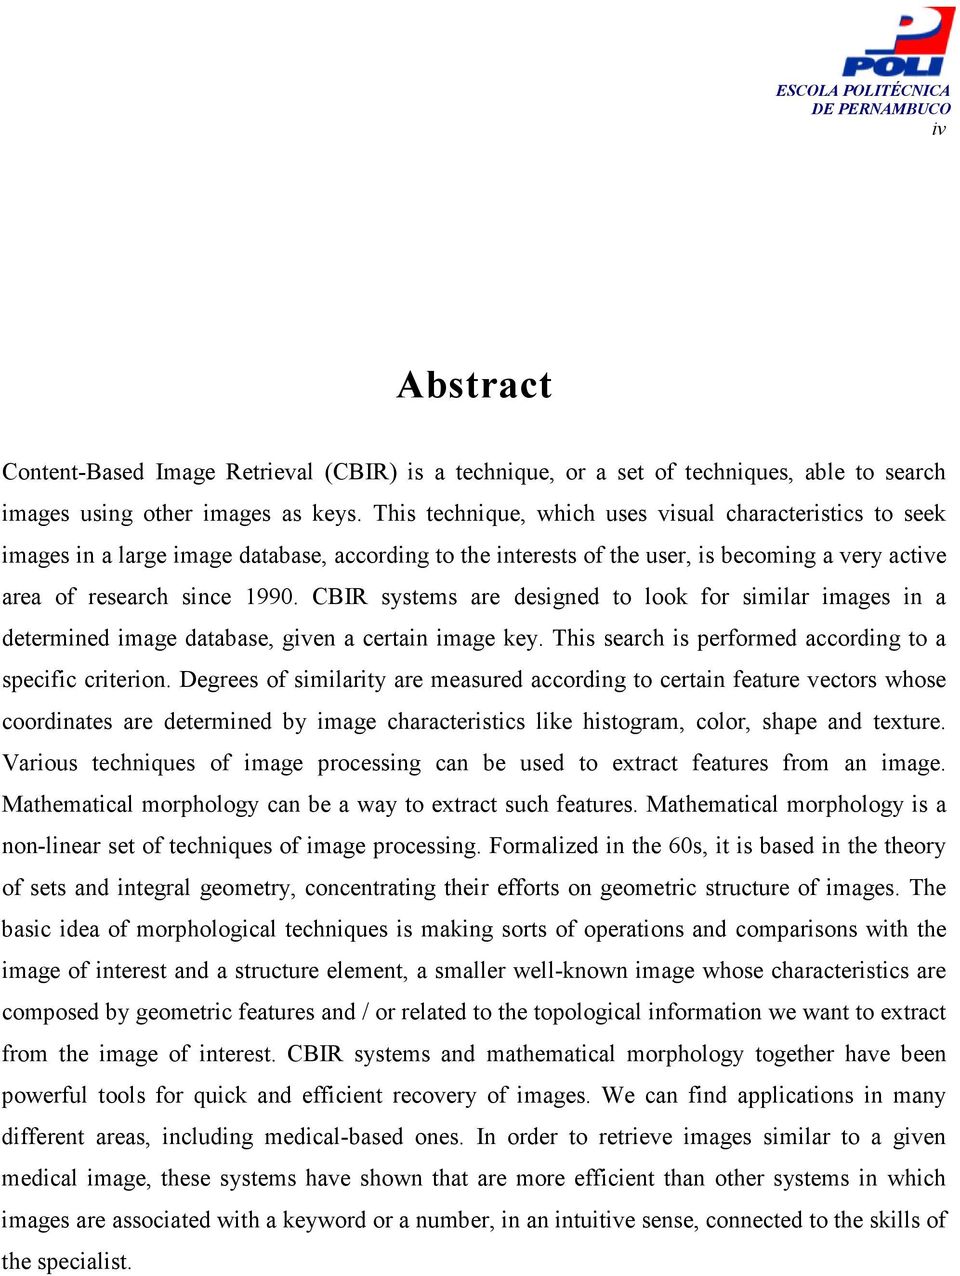 CBIR systems are designed to look for similar images in a determined image database, given a certain image key. This search is performed according to a specific criterion.